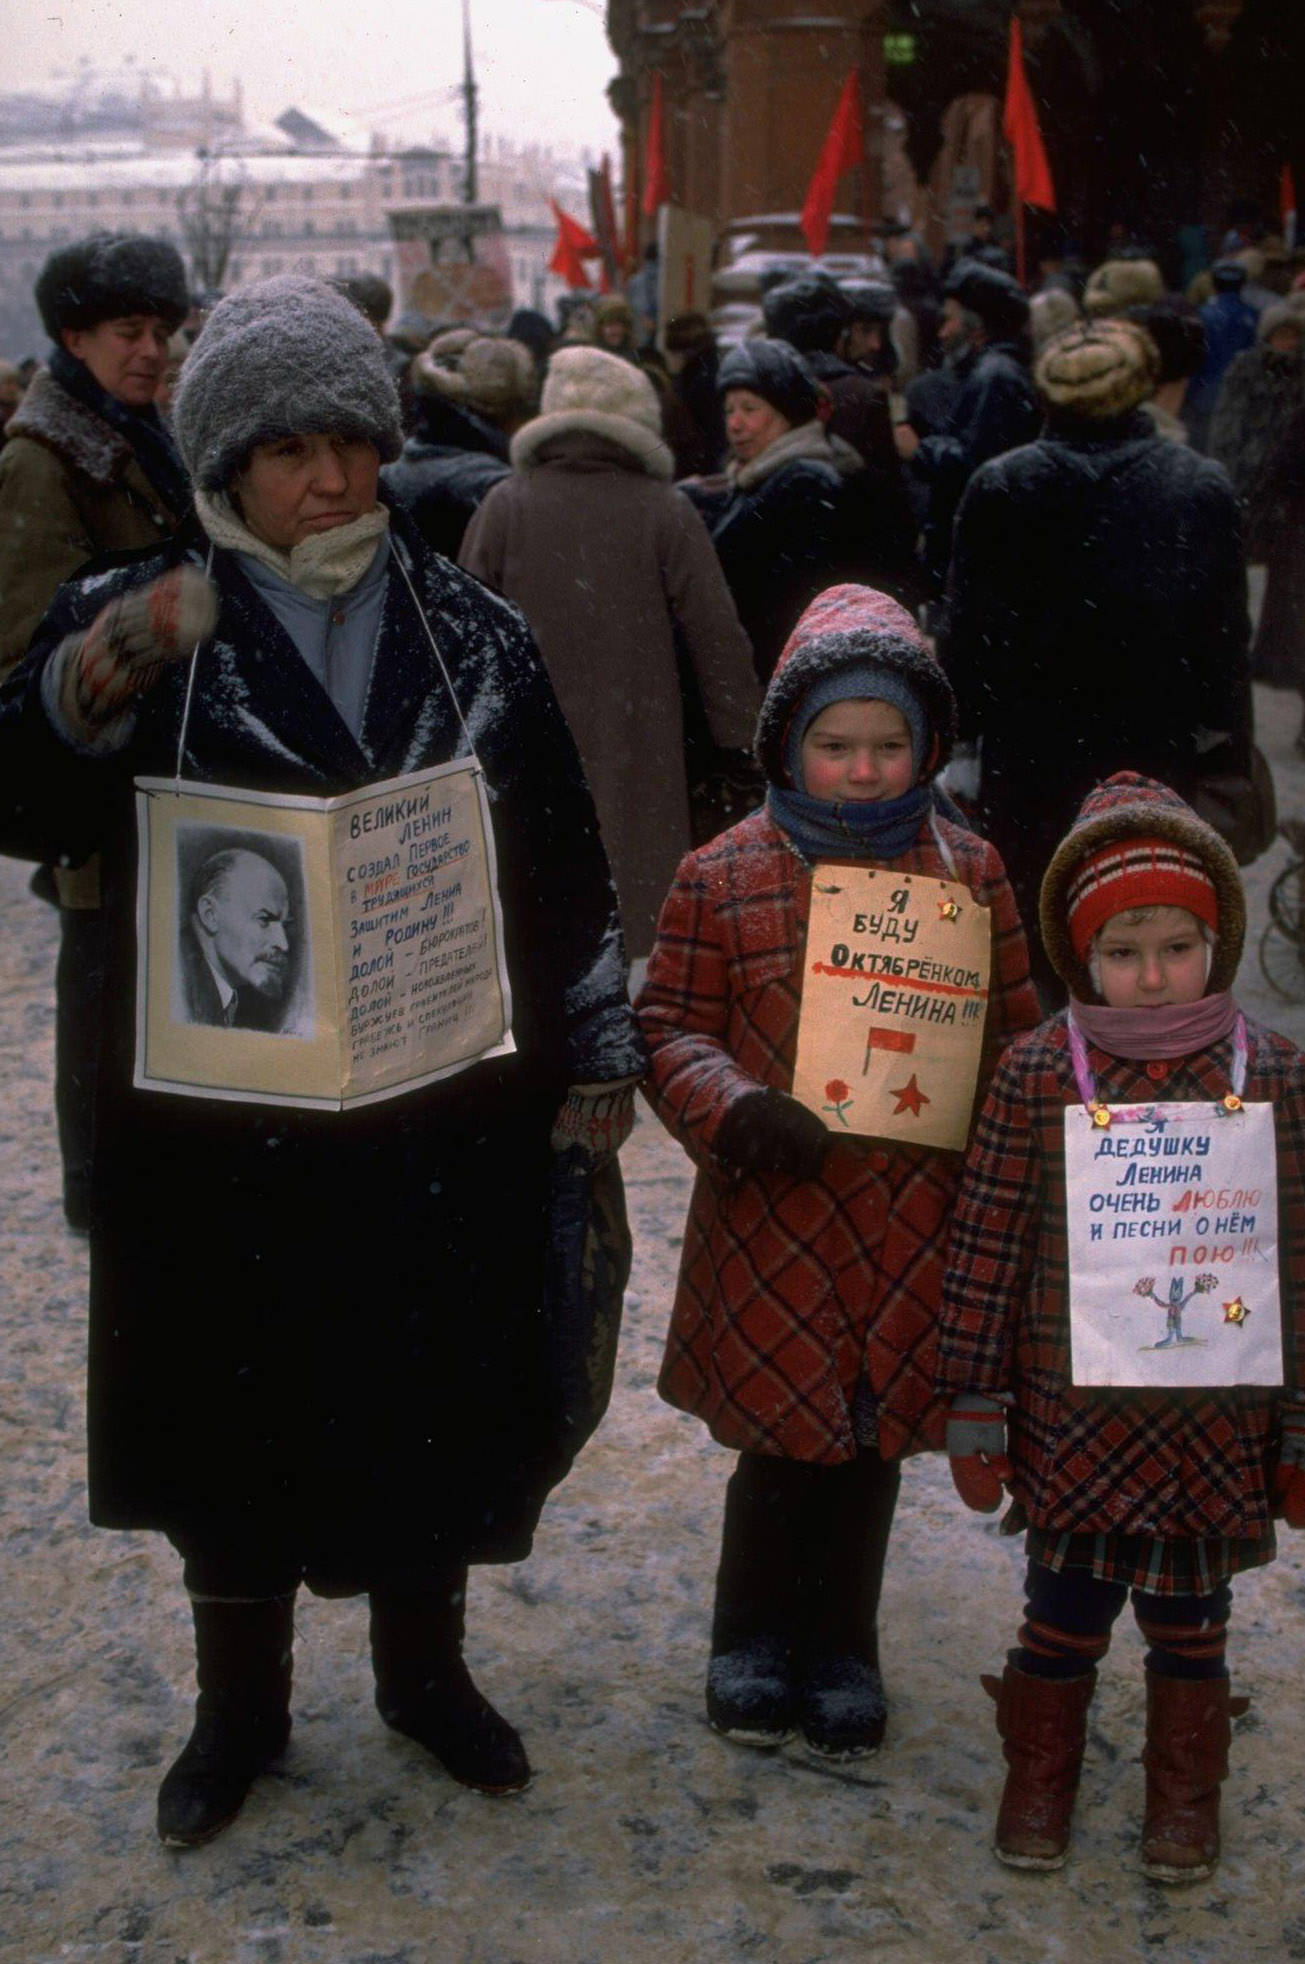 Little girls and woman carrying Lenin picture among diehard demonstrators protesting for return of USSR and Communist Party by Lenin Museum.